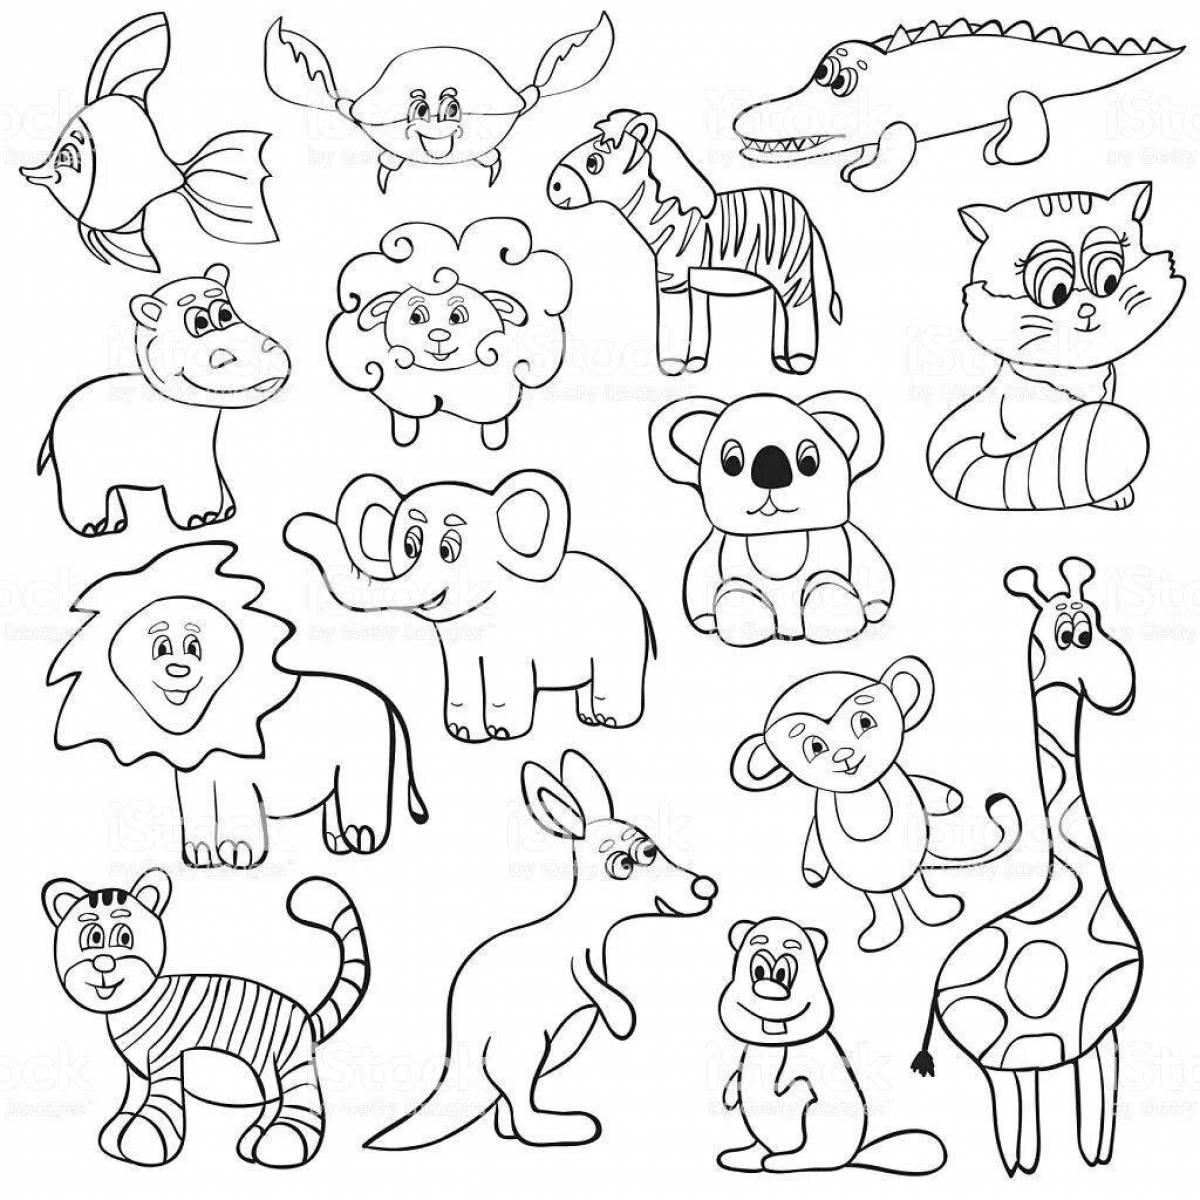 Animated coloring page of many animals